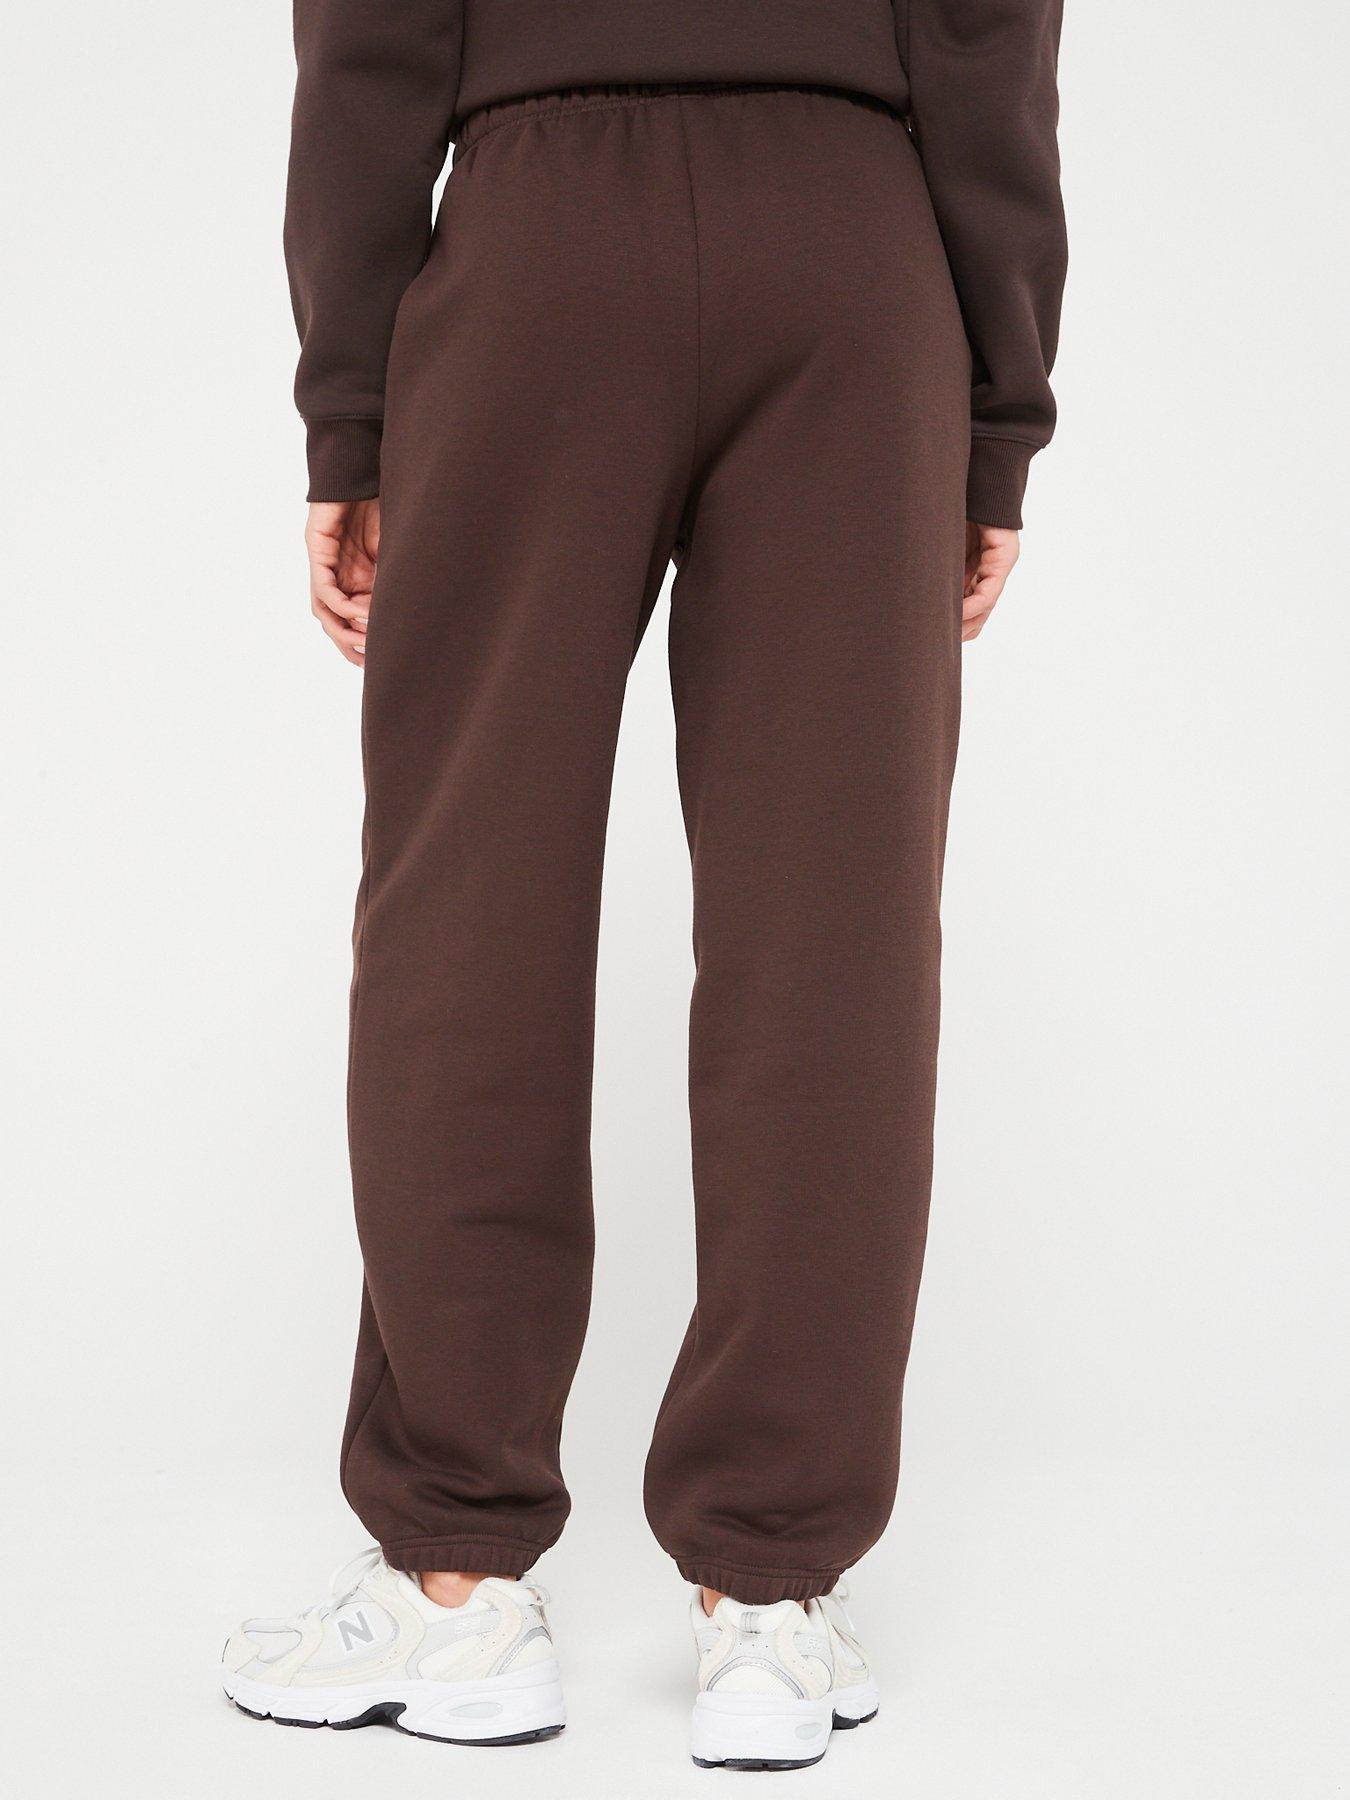 New Balance Womens Linear Heritage Brushed Back Fleece Sweatpant - Brown